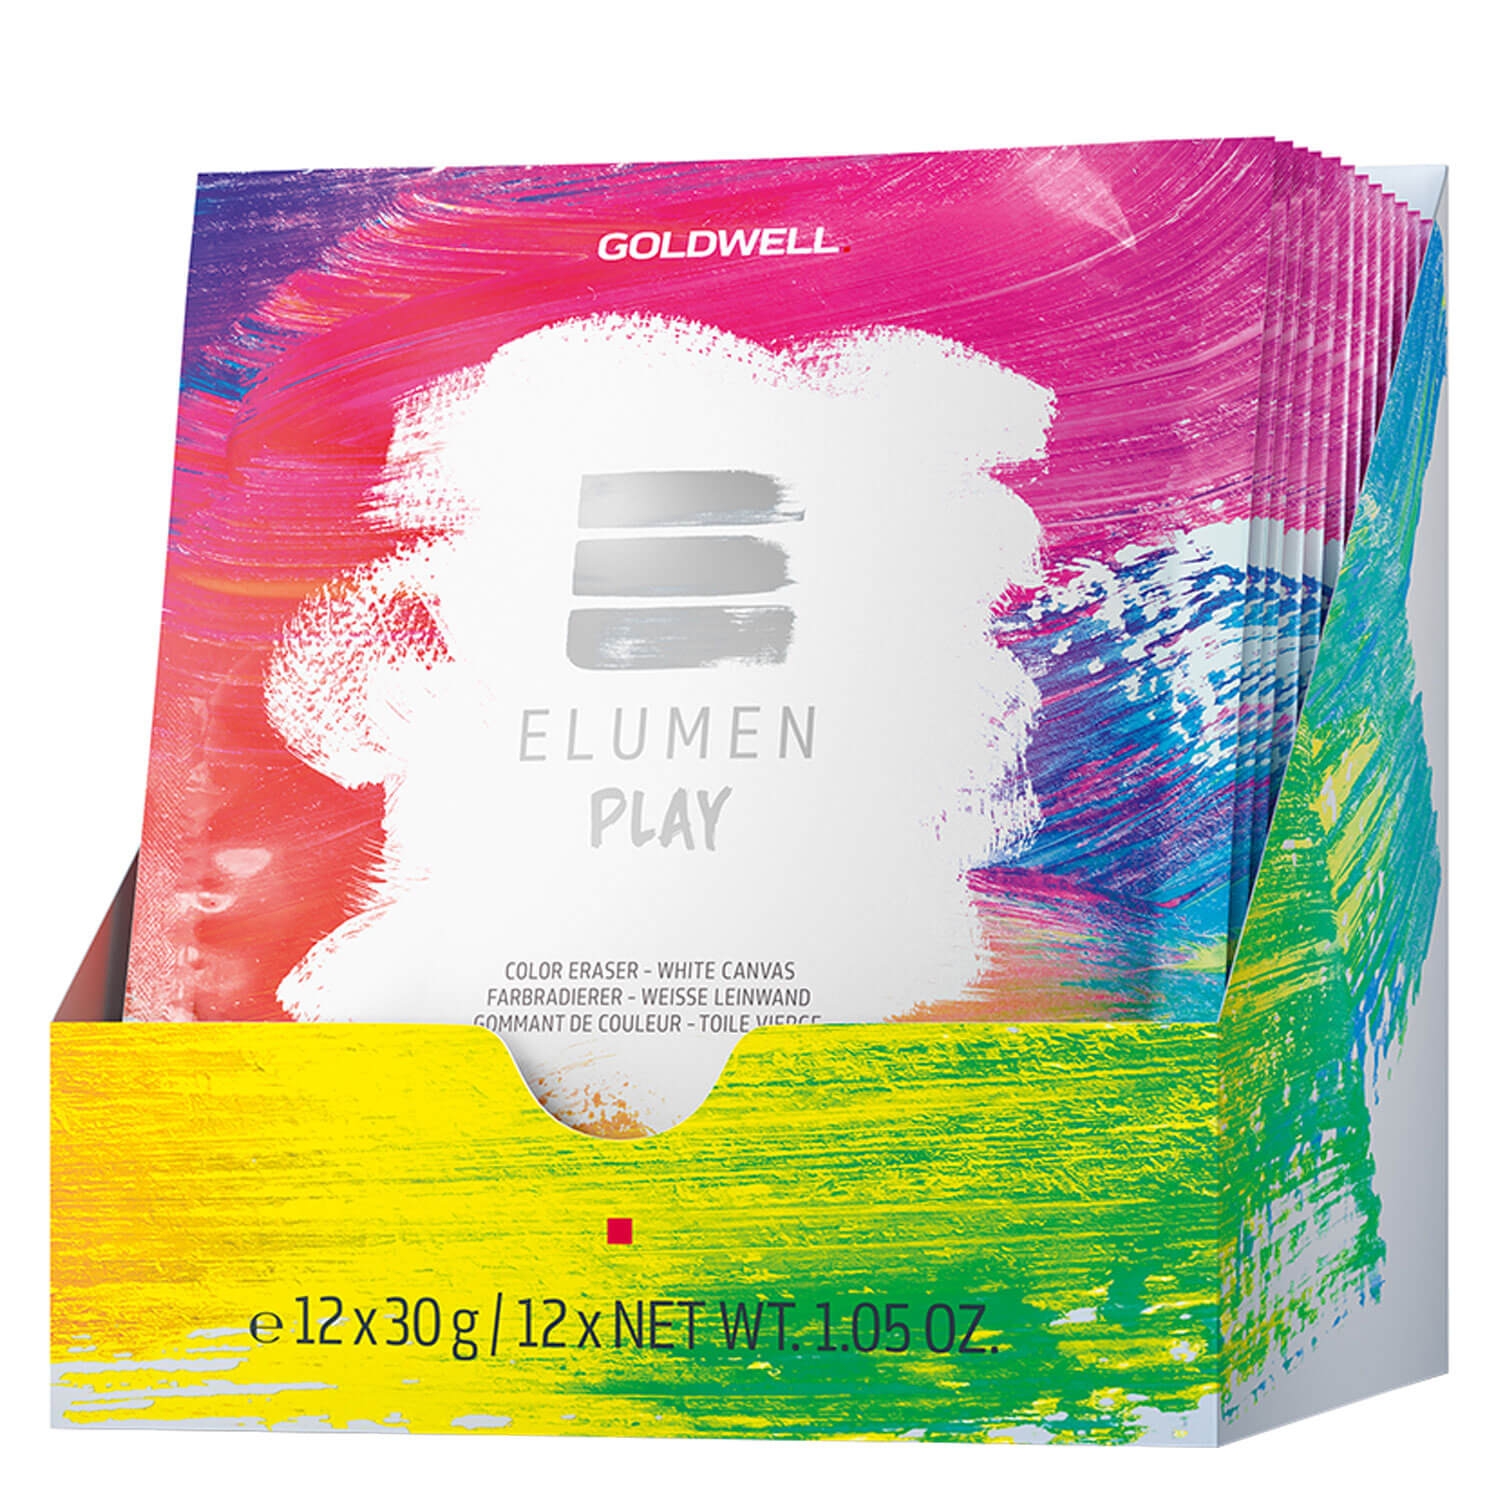 Product image from Elumen - Play Farbradierer Weisse Leinwand